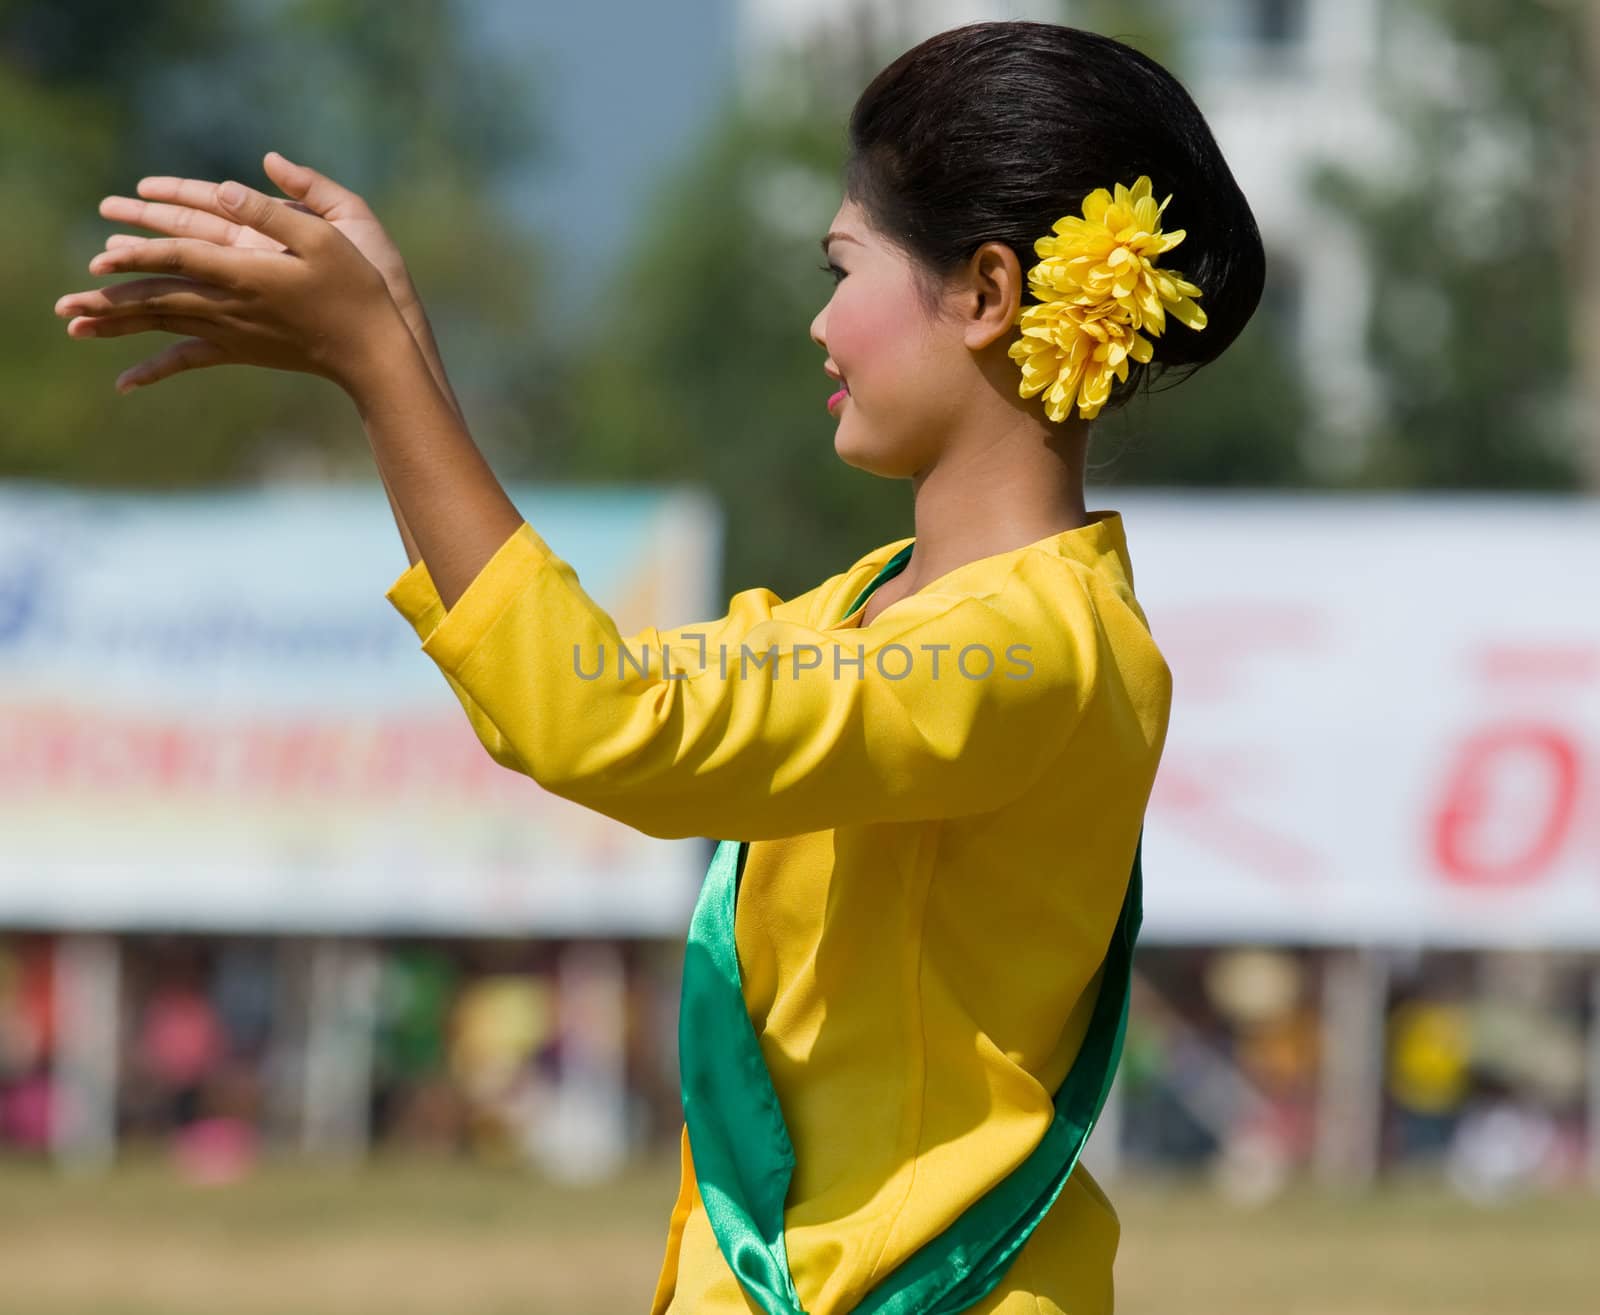 SURIN - NOVEMBER 21: Dancer in traditional silk outfits during The Annual Elephant Roundup on November 21, 2010 in Surin, Thailand.